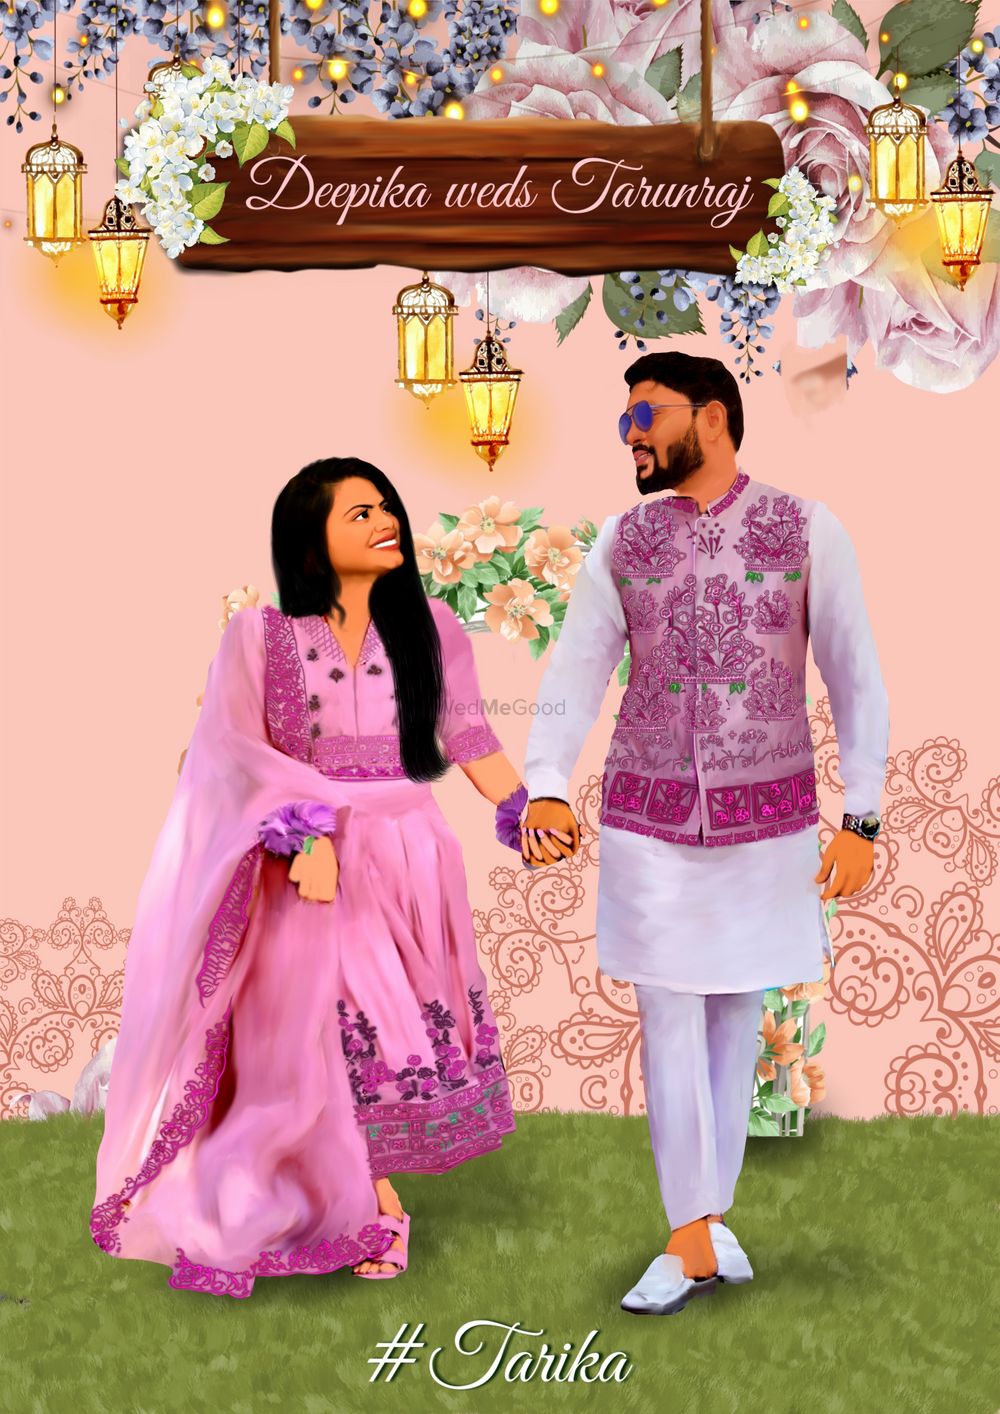 Photo From Caricature Wedding Invitations  - By Parleen Kaur Jaiswal